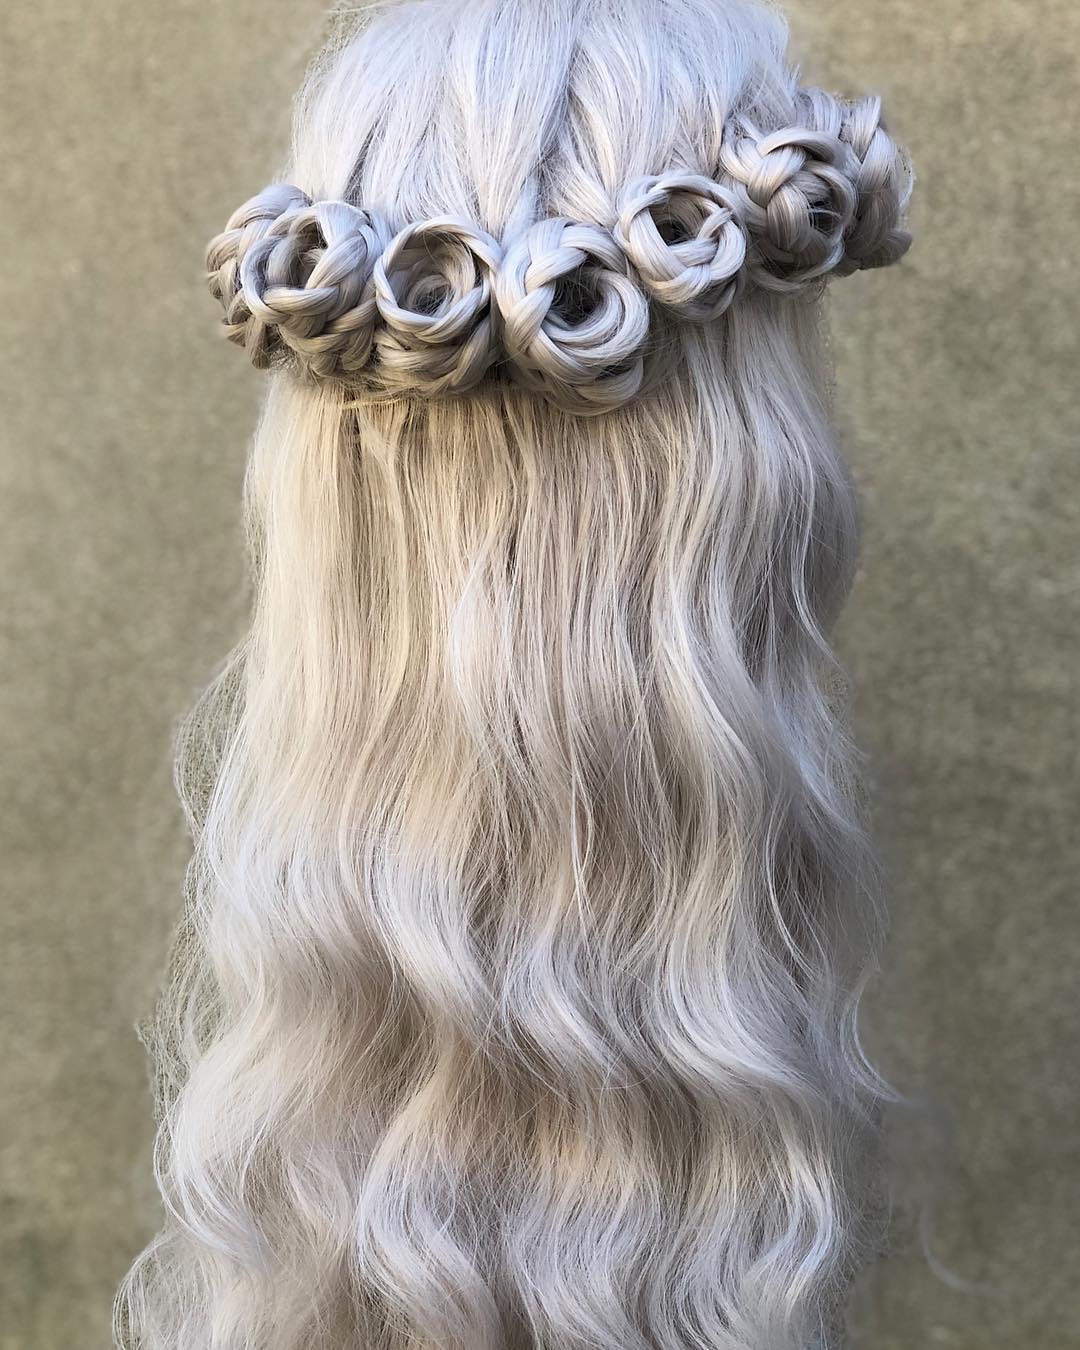 Braided Rose Hairstyle Is the New Trend This Summer